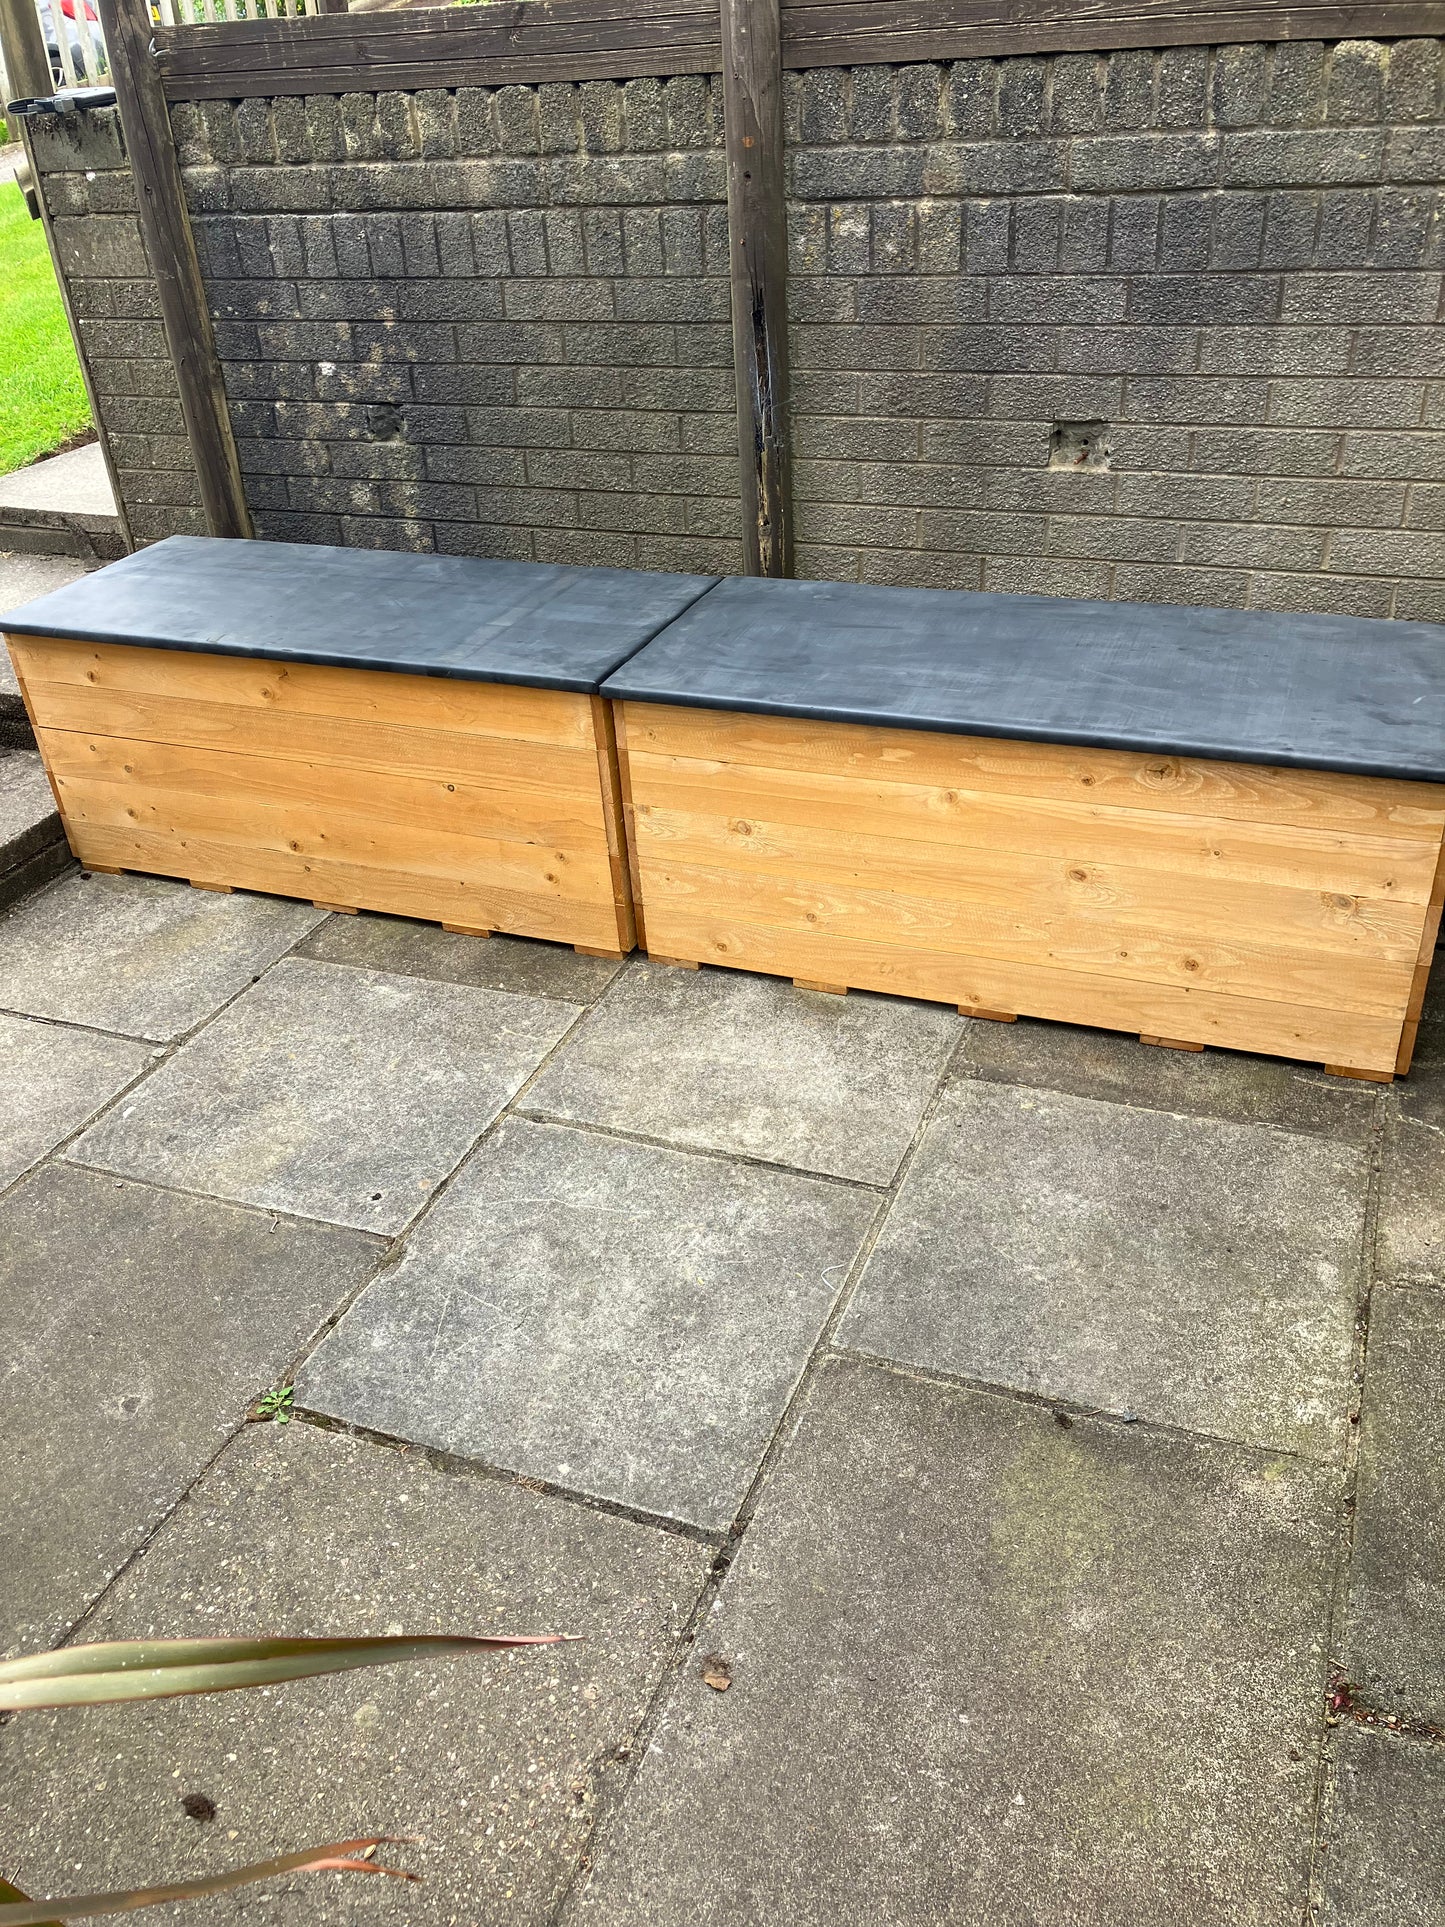 Two Recycling Storage Benches with EPDM rubber lids